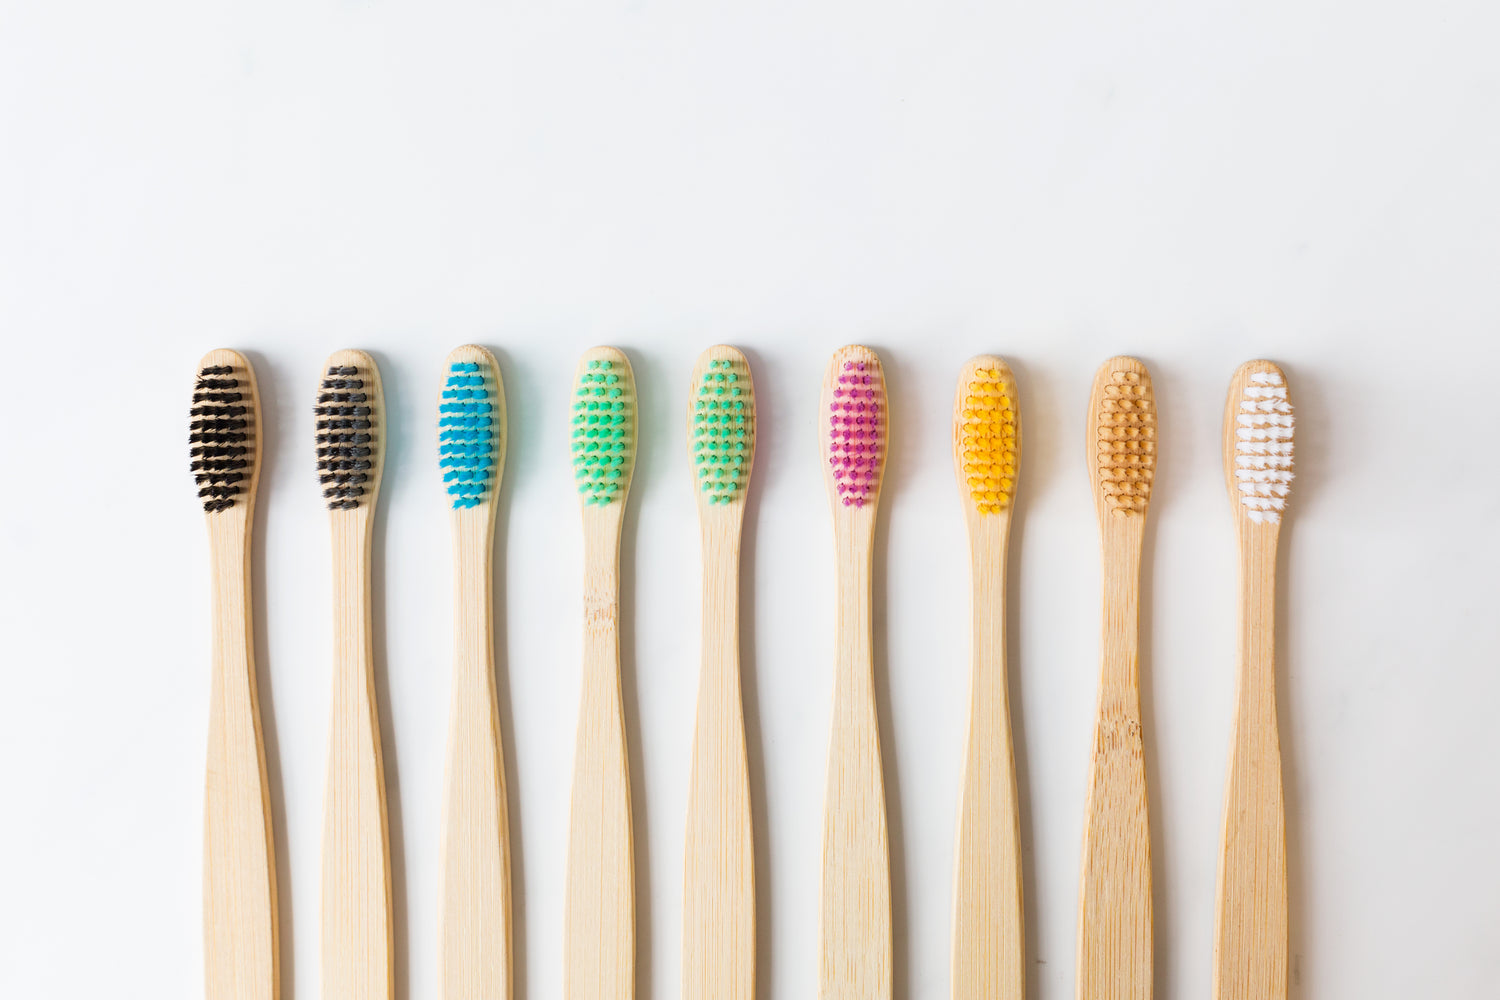 BENEFITS OF USING A BAMBOO TOOTHBRUSH